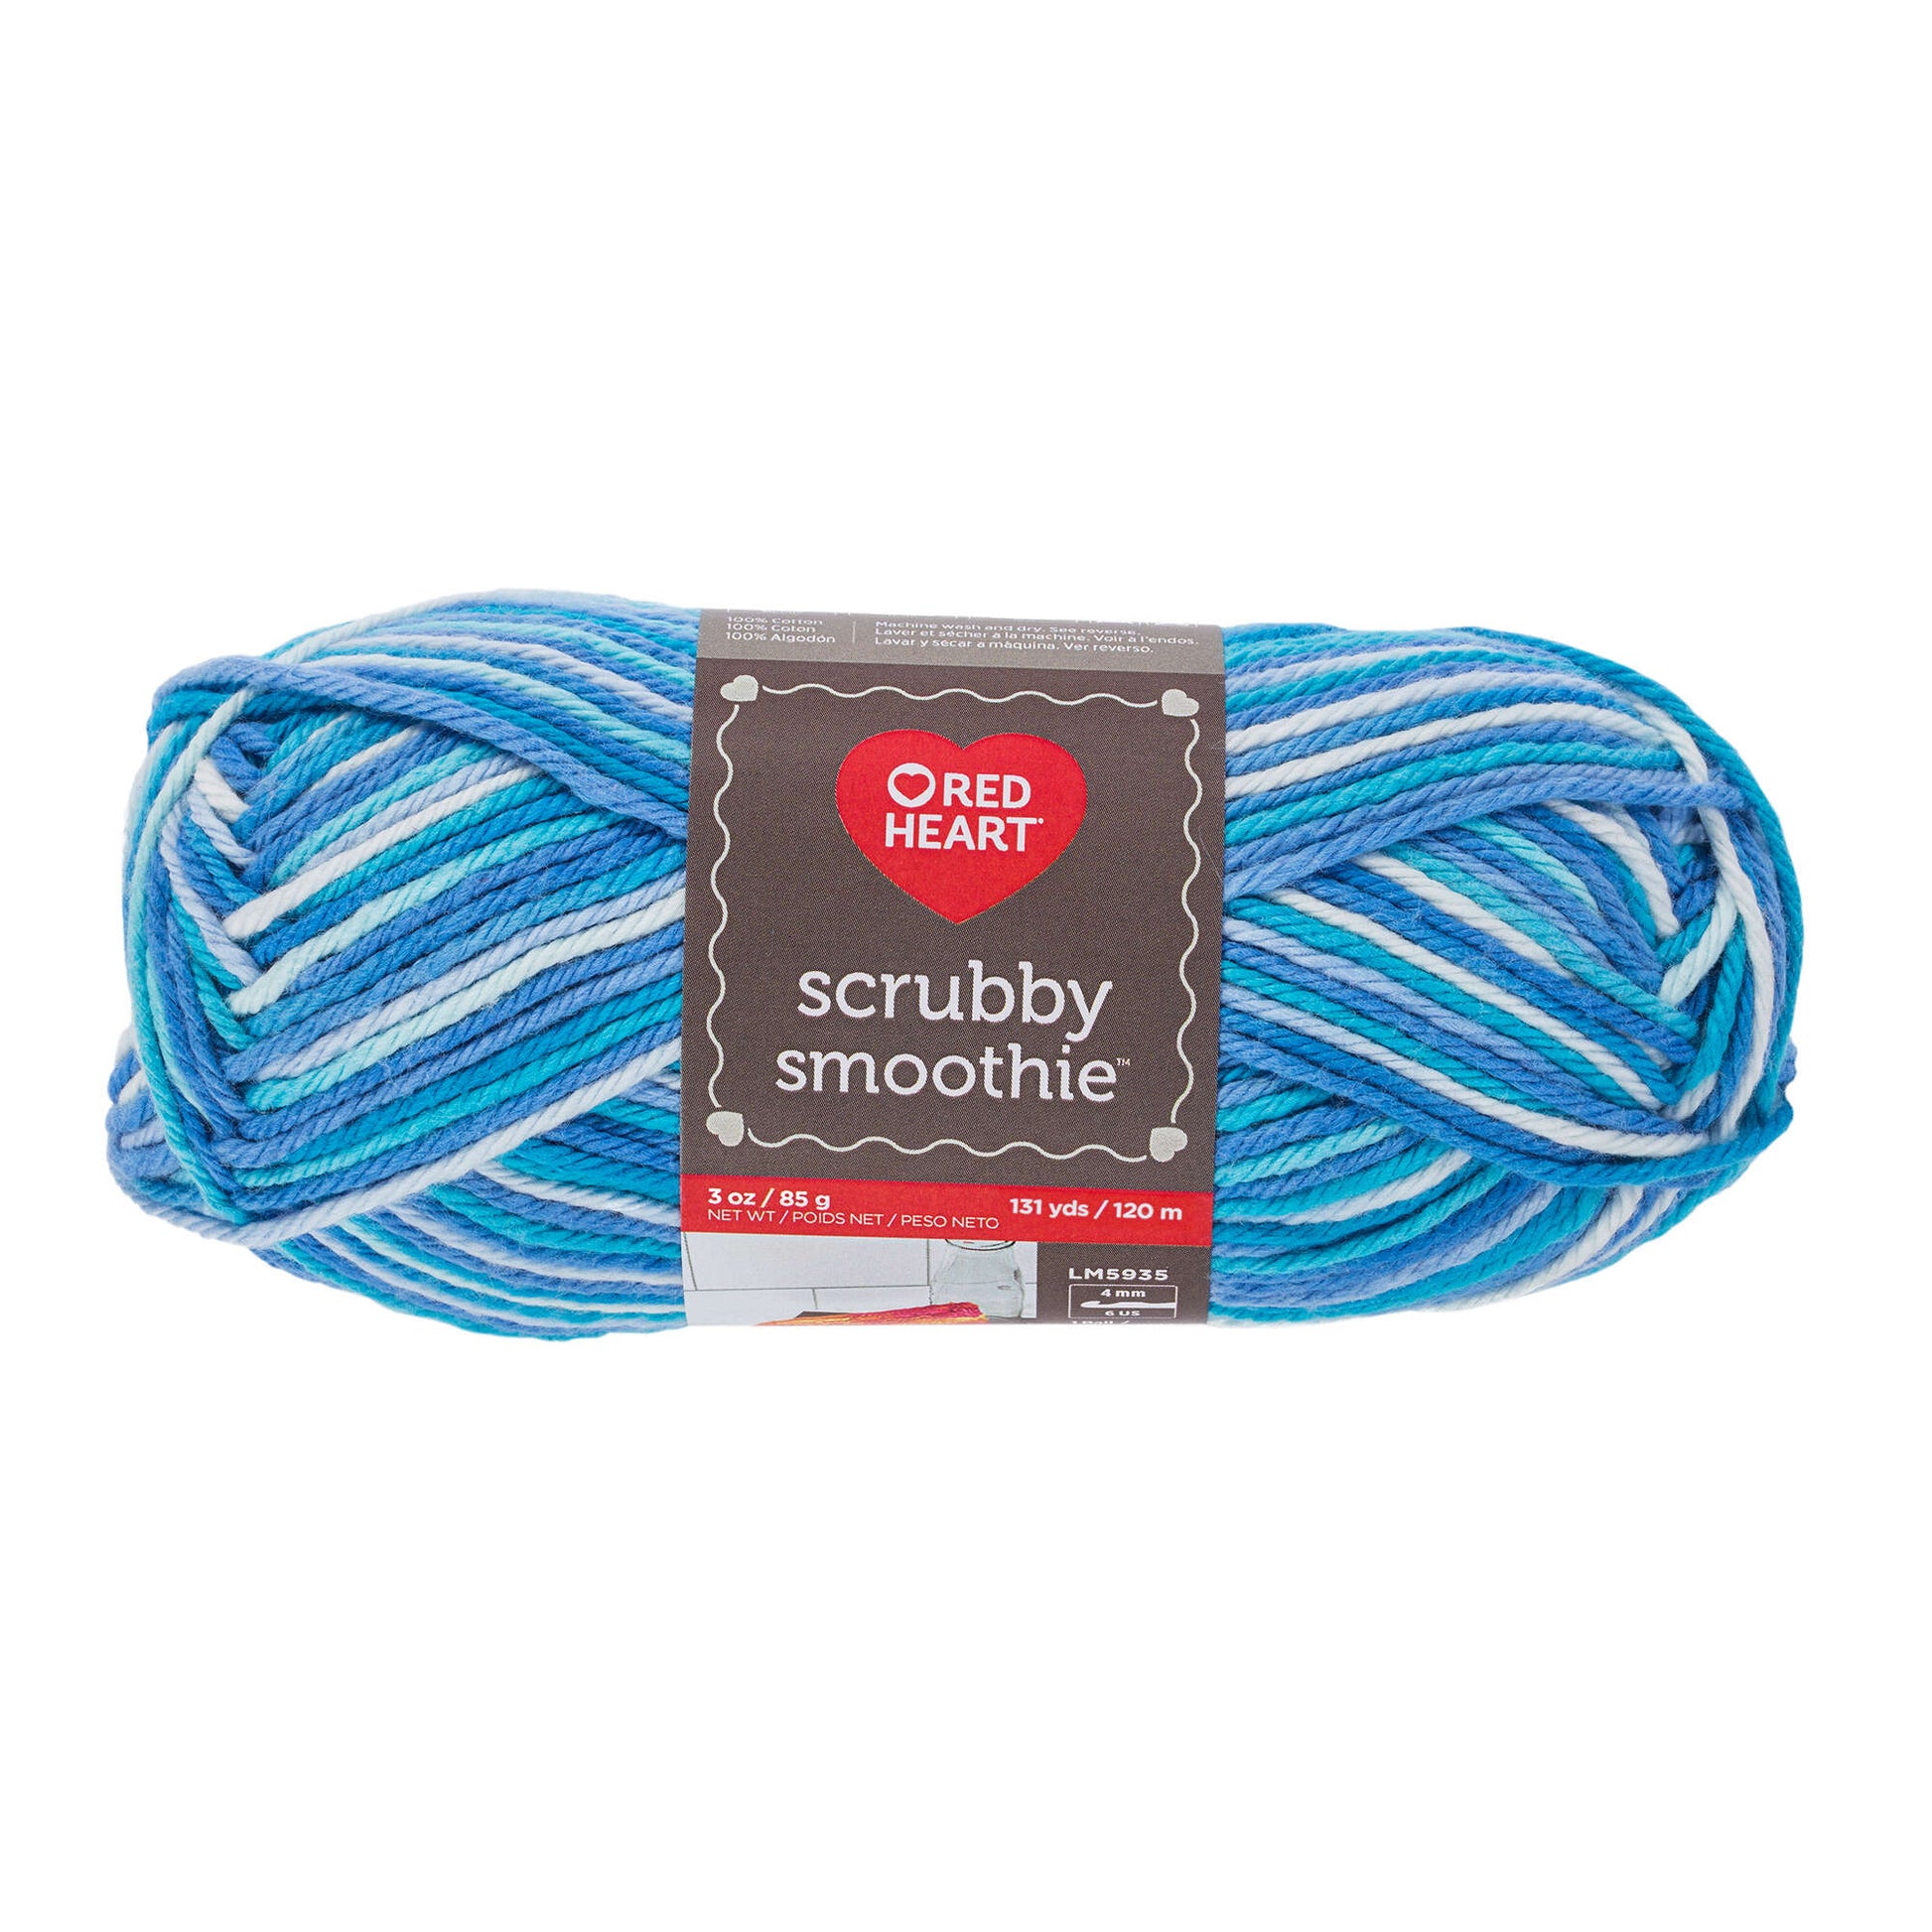 Red Heart Scrubby Smoothie Yarn - Clearance shades Waves